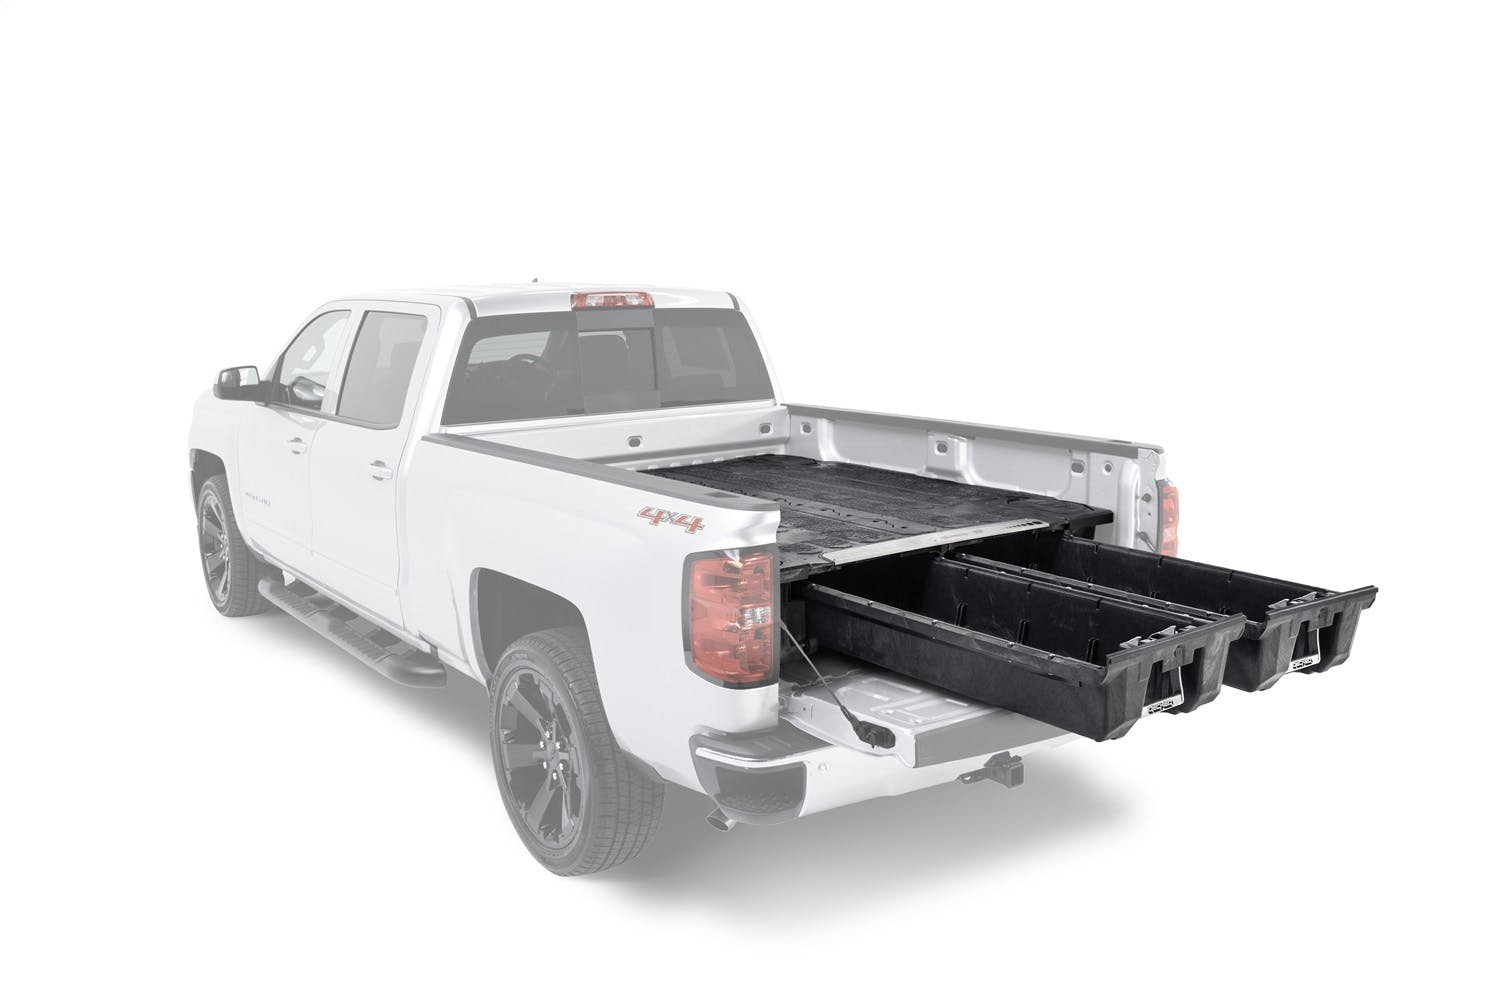 DECKED DG6 Two Drawer Storage System for A Full Size Pick Up Truck